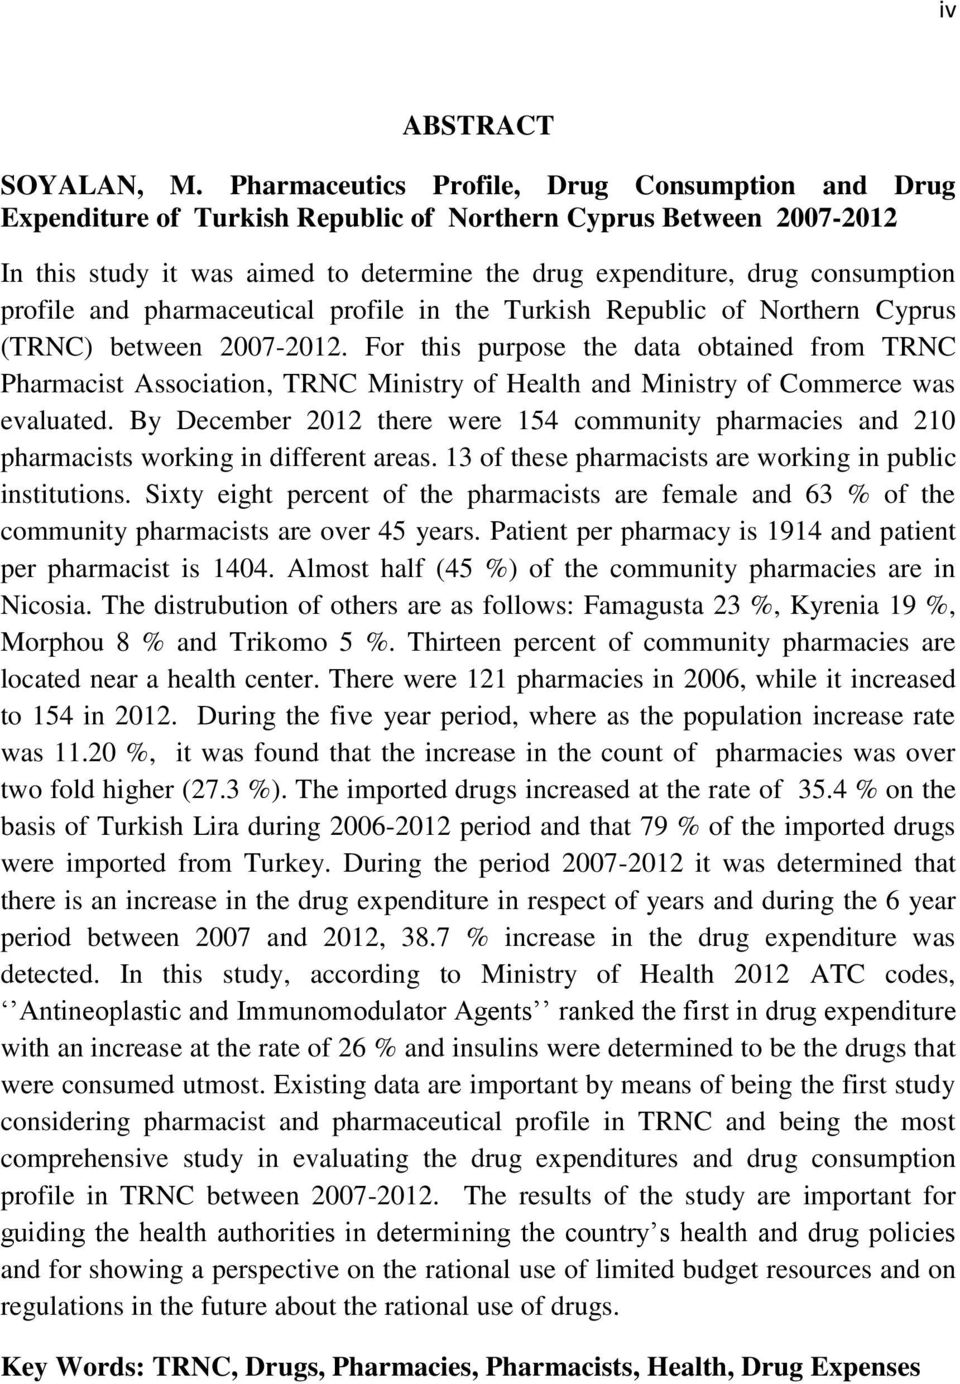 profile and pharmaceutical profile in the Turkish Republic of Northern Cyprus (TRNC) between 2007-2012.